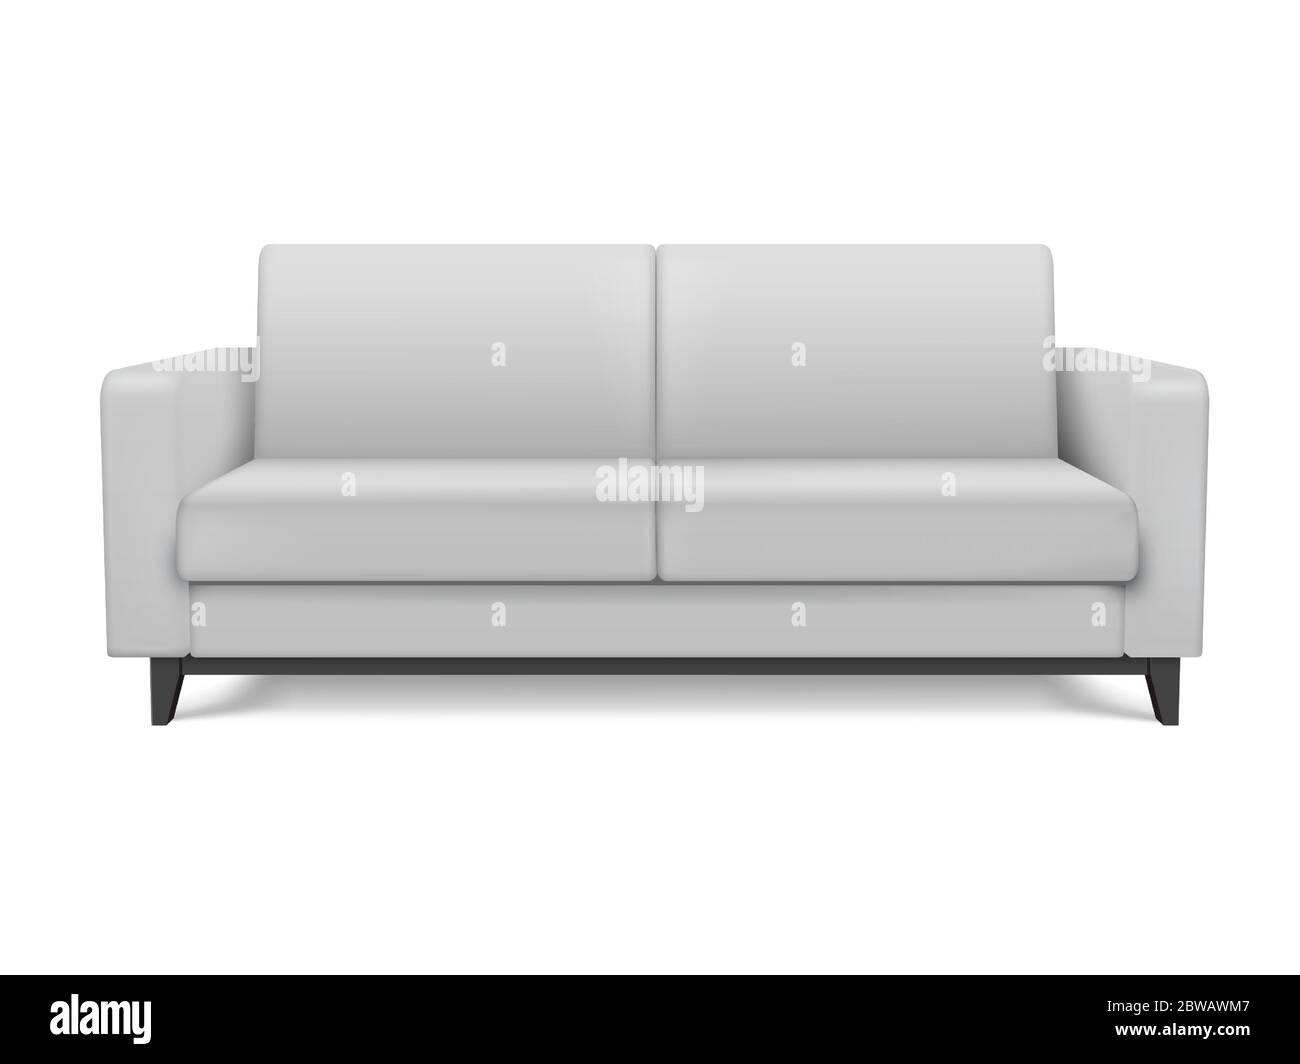 White realistic modern sofa. Furniture for the living room or lounge. Stock Vector